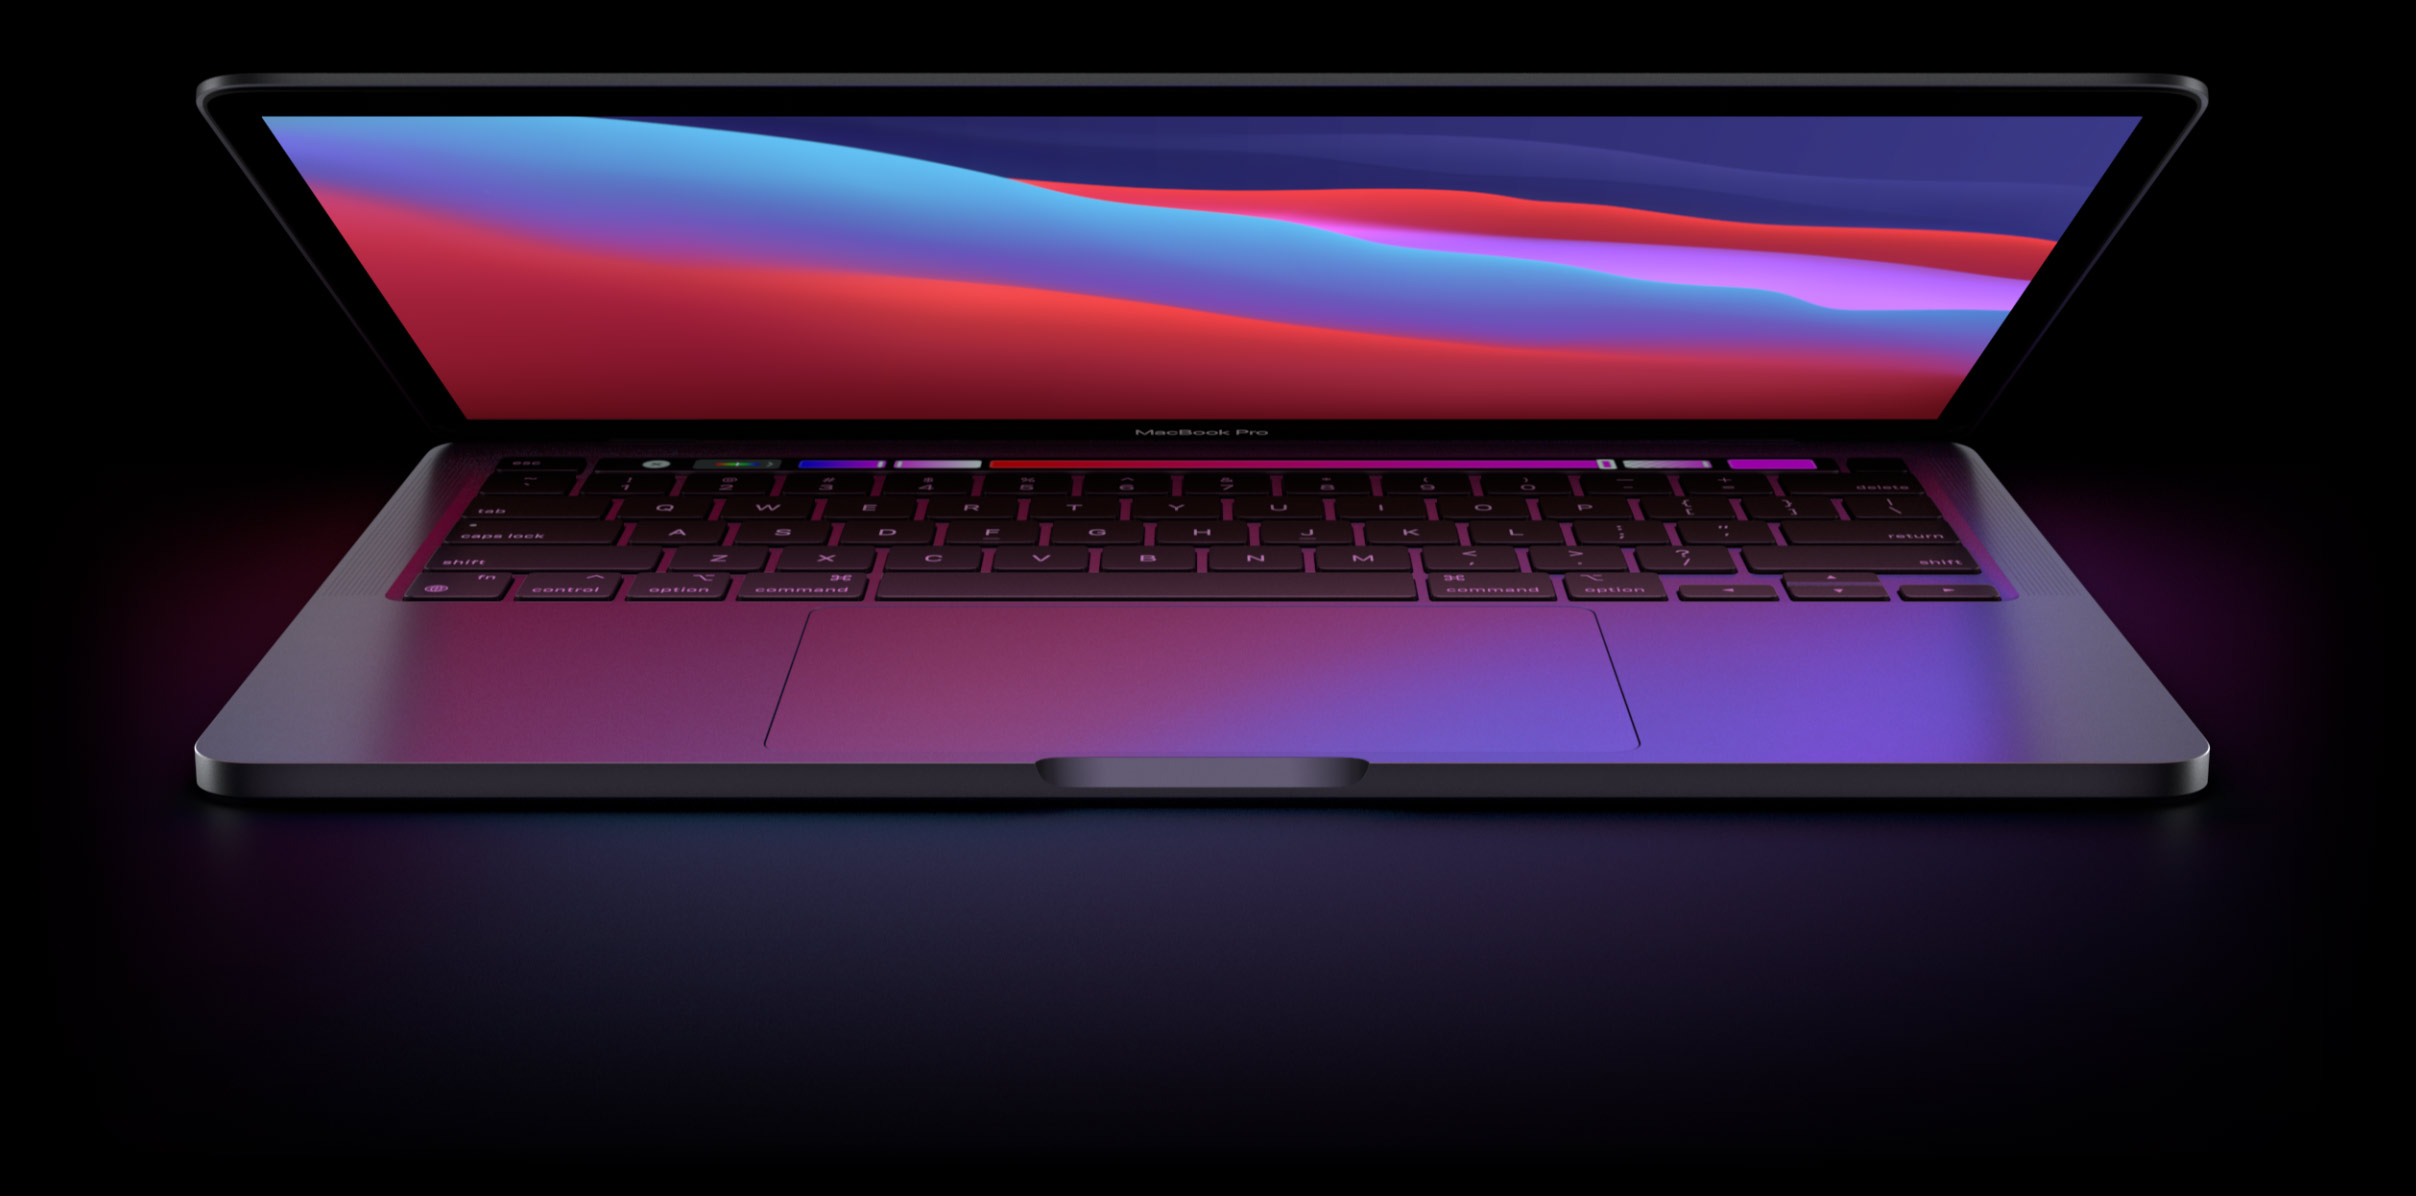 Macbook m1 pro display on with touch bar